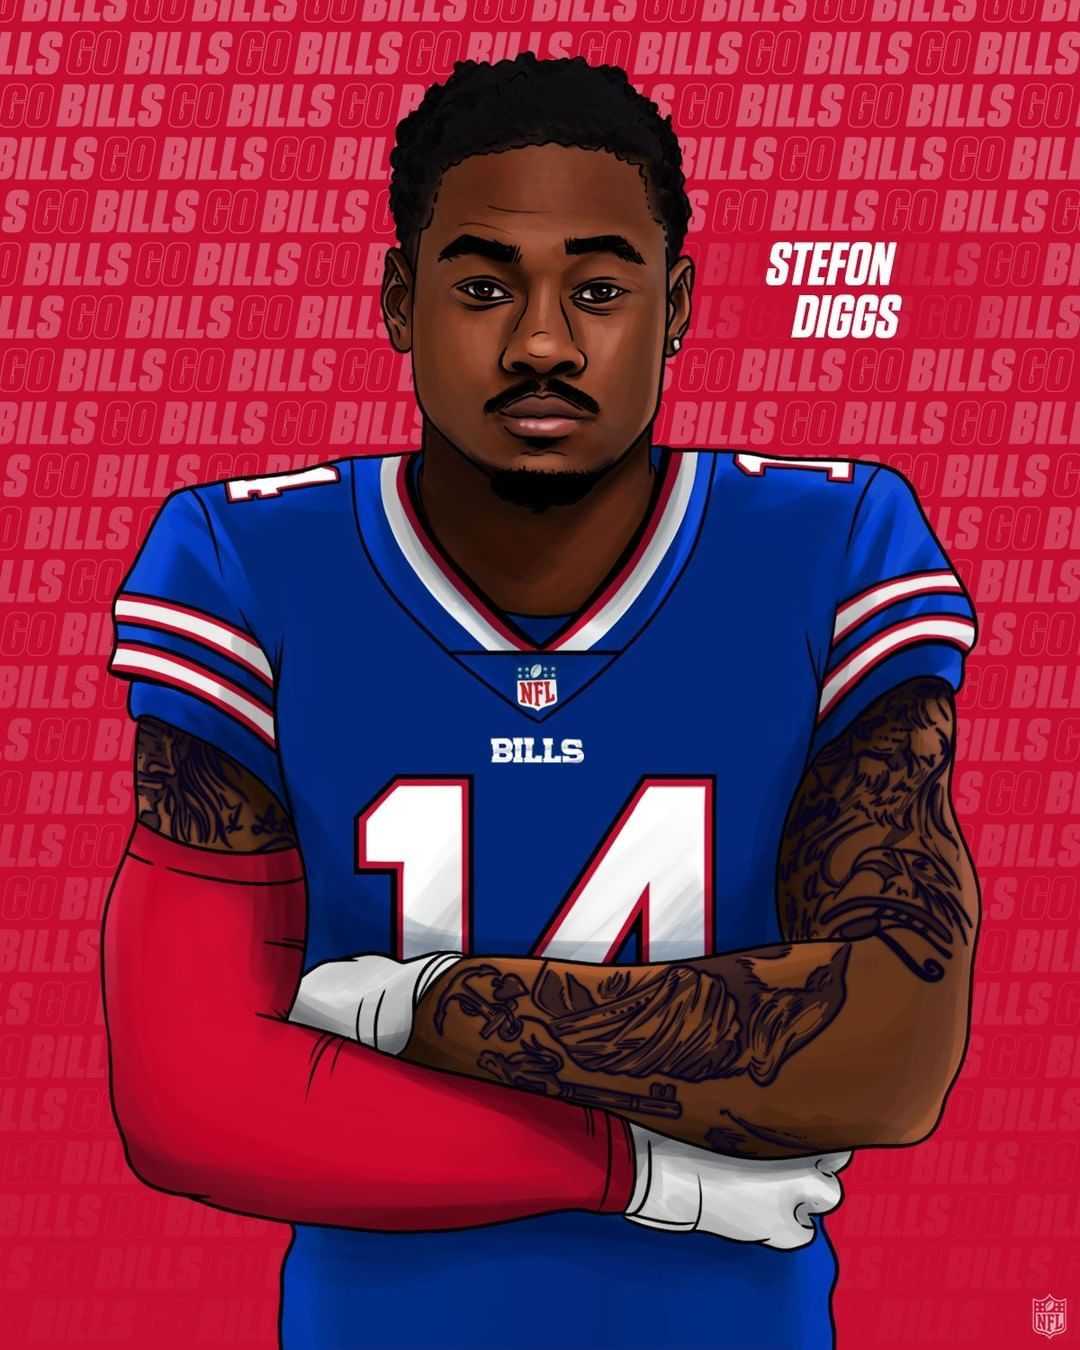 Stefon Diggs NFL Wallpaper - KoLPaPer - Awesome Free HD Wallpapers.